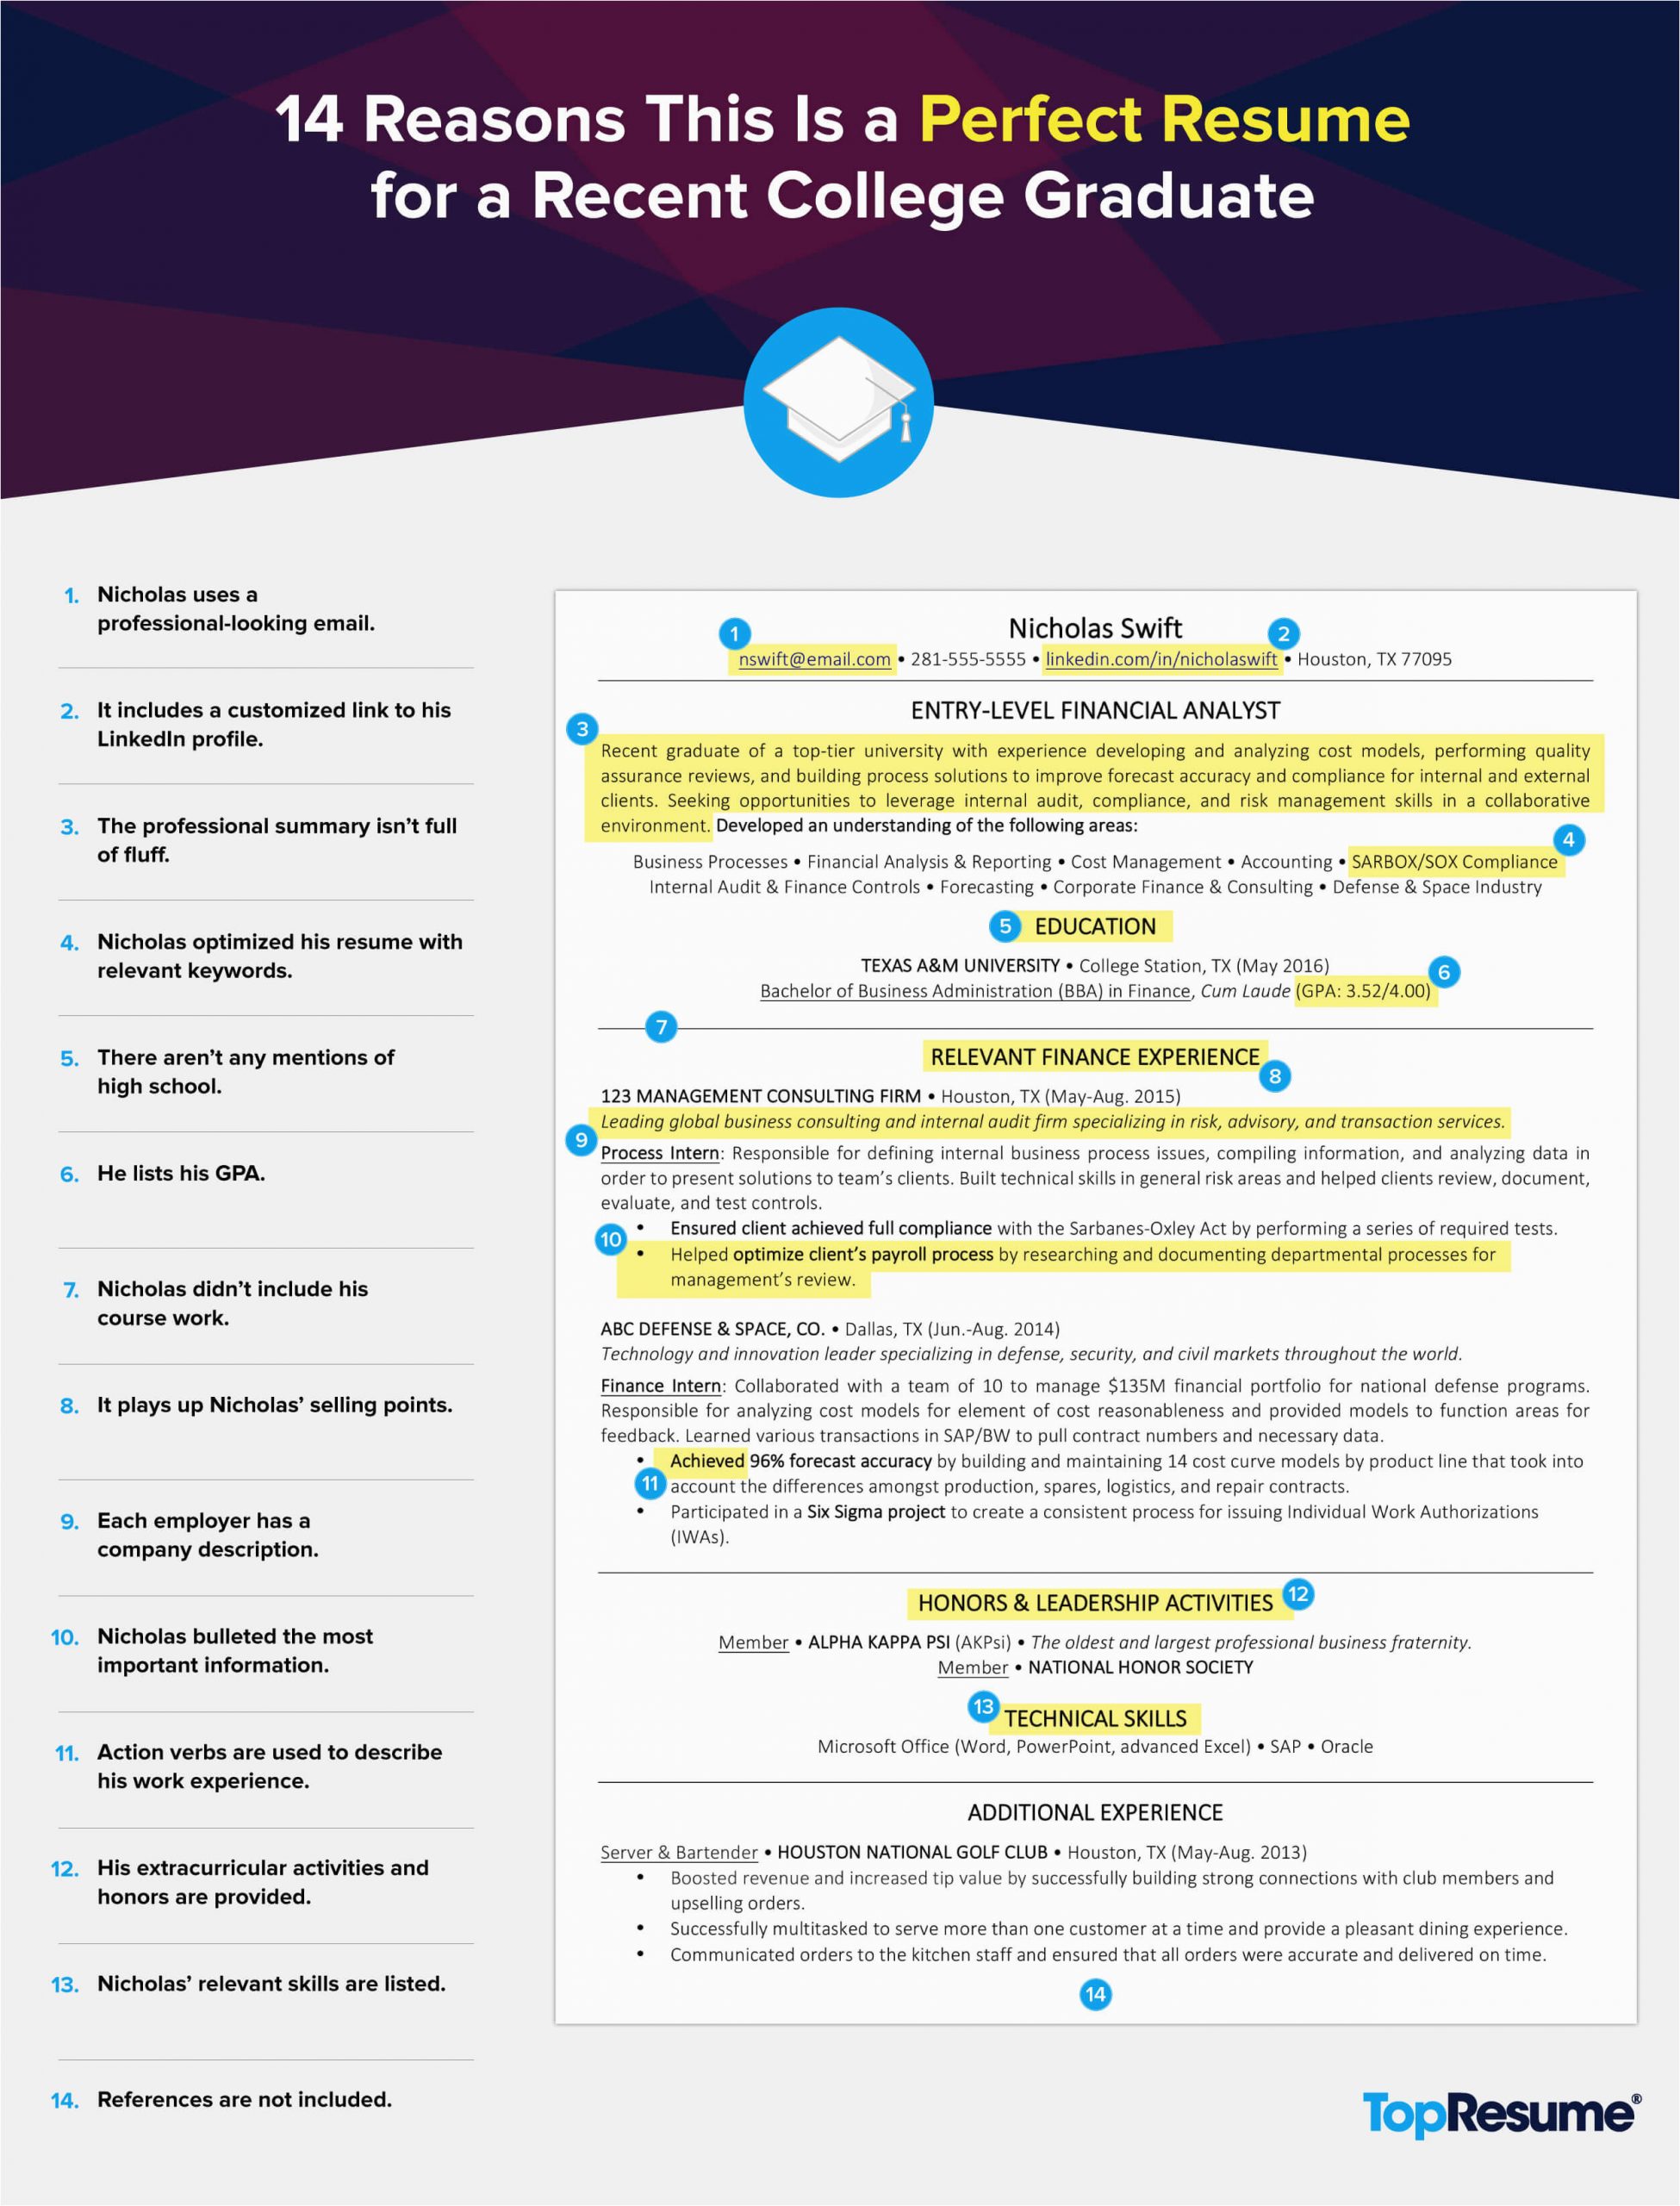 Sample Resume for New College Graduate 14 Reasons This is A Perfect Recent College Graduate